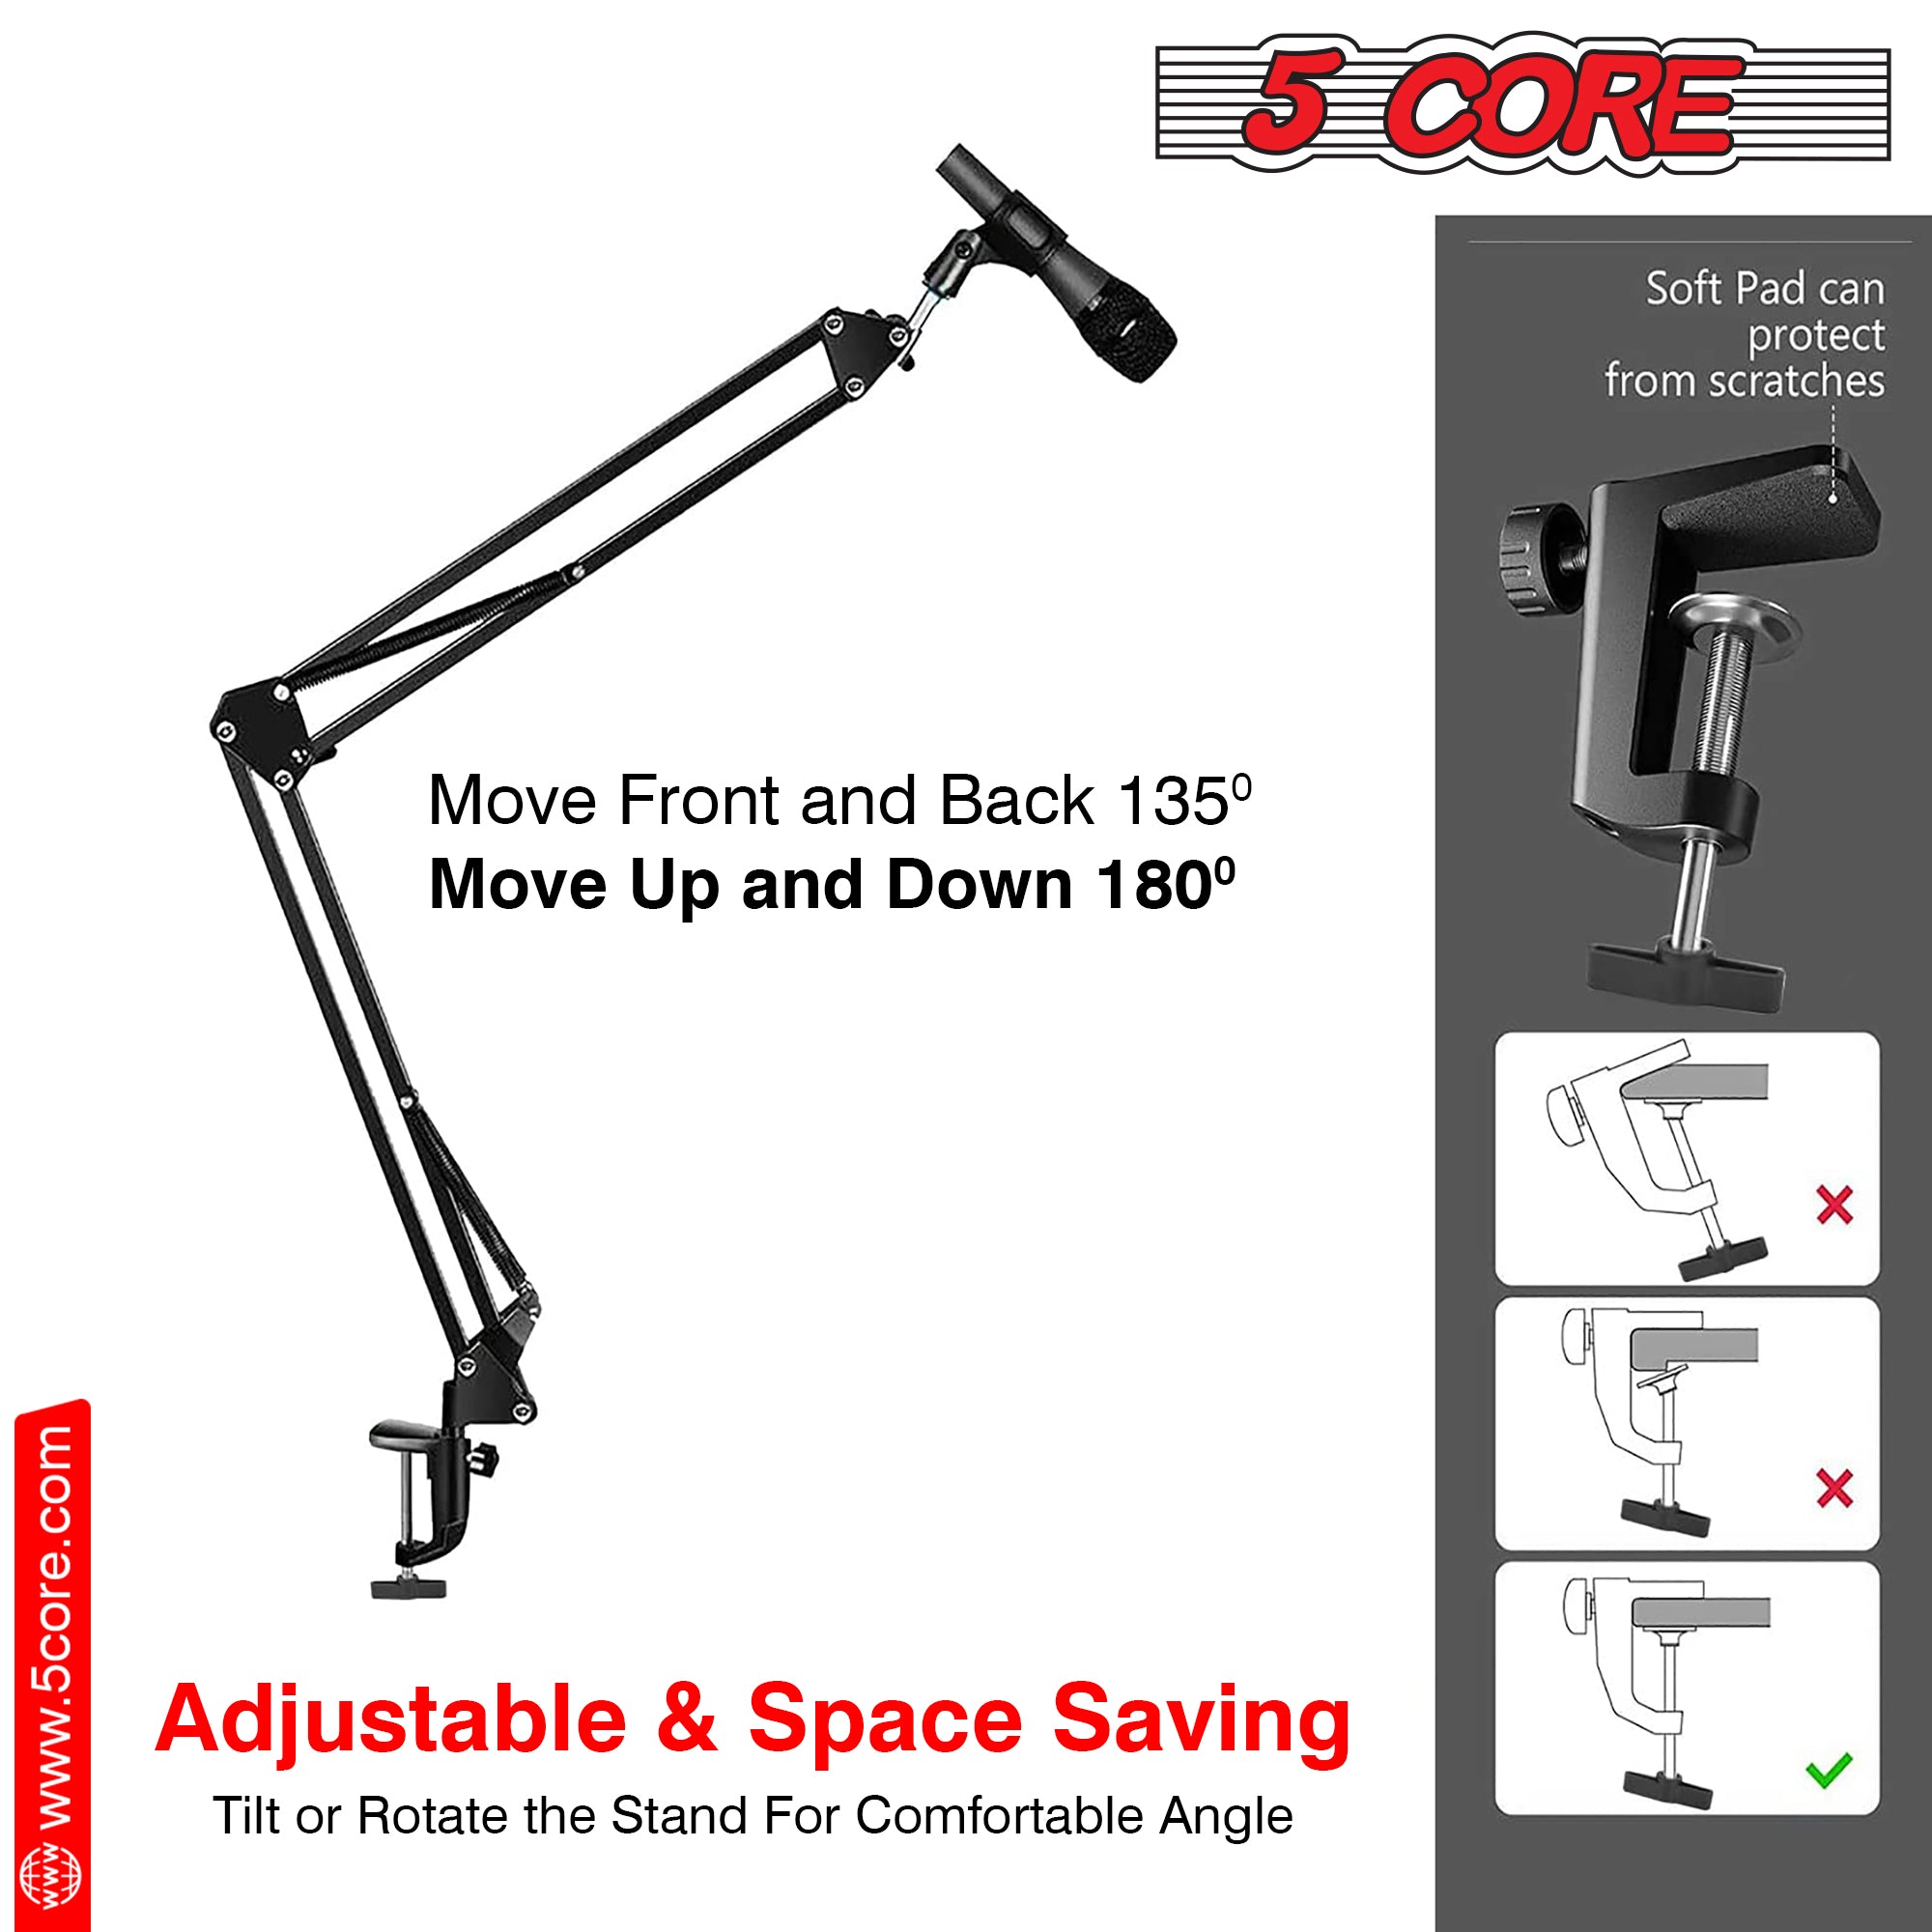 move front and back, adjustable & space saving